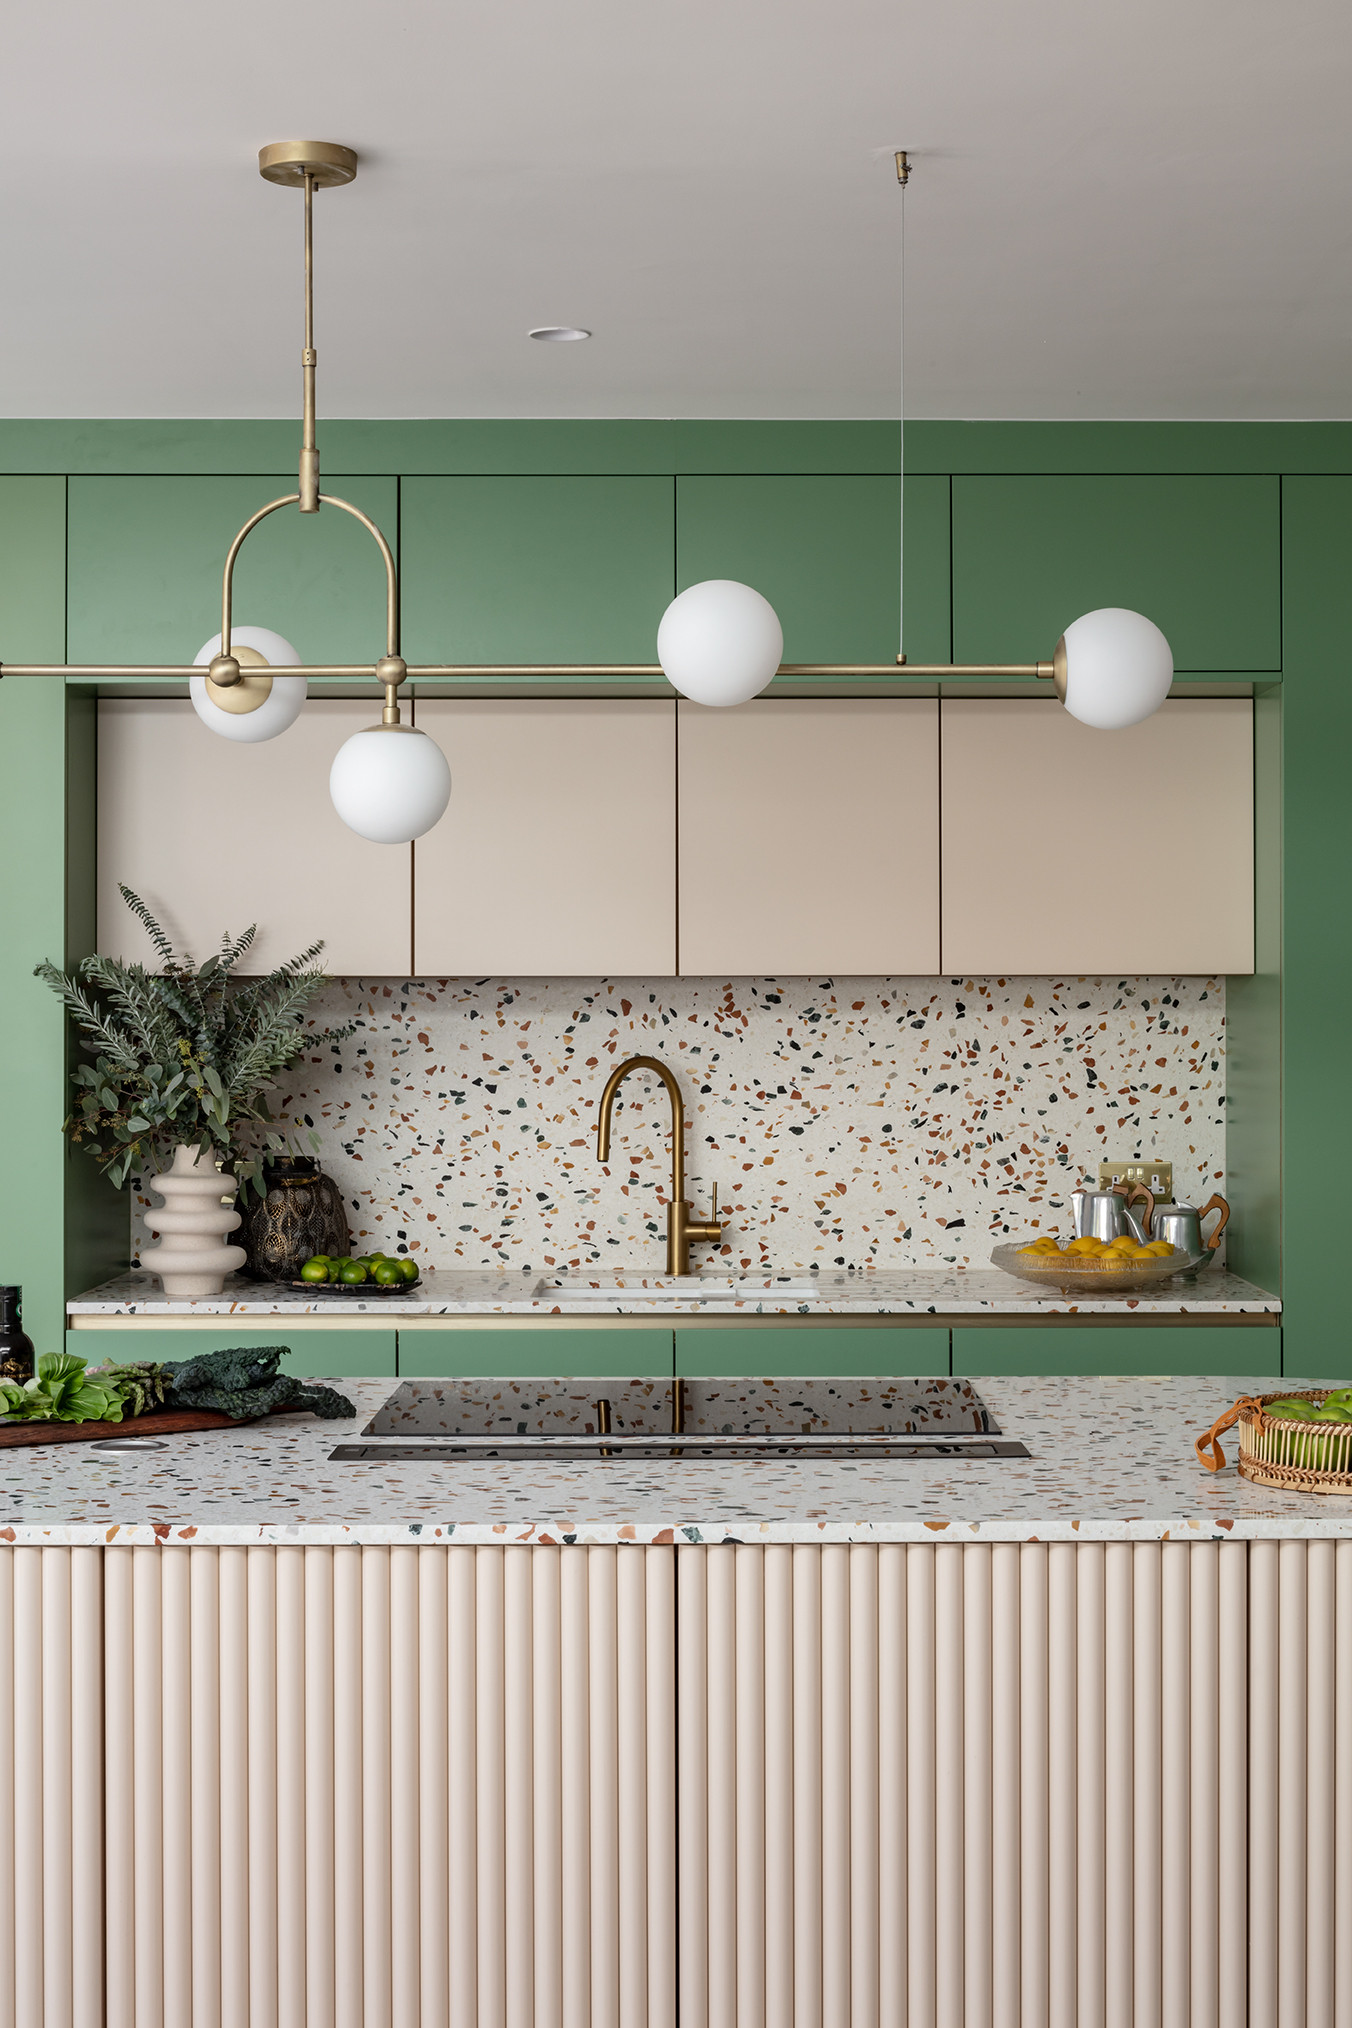 Mint Green Kitchen Cabinets Add A Colorful Element To This Home Addition